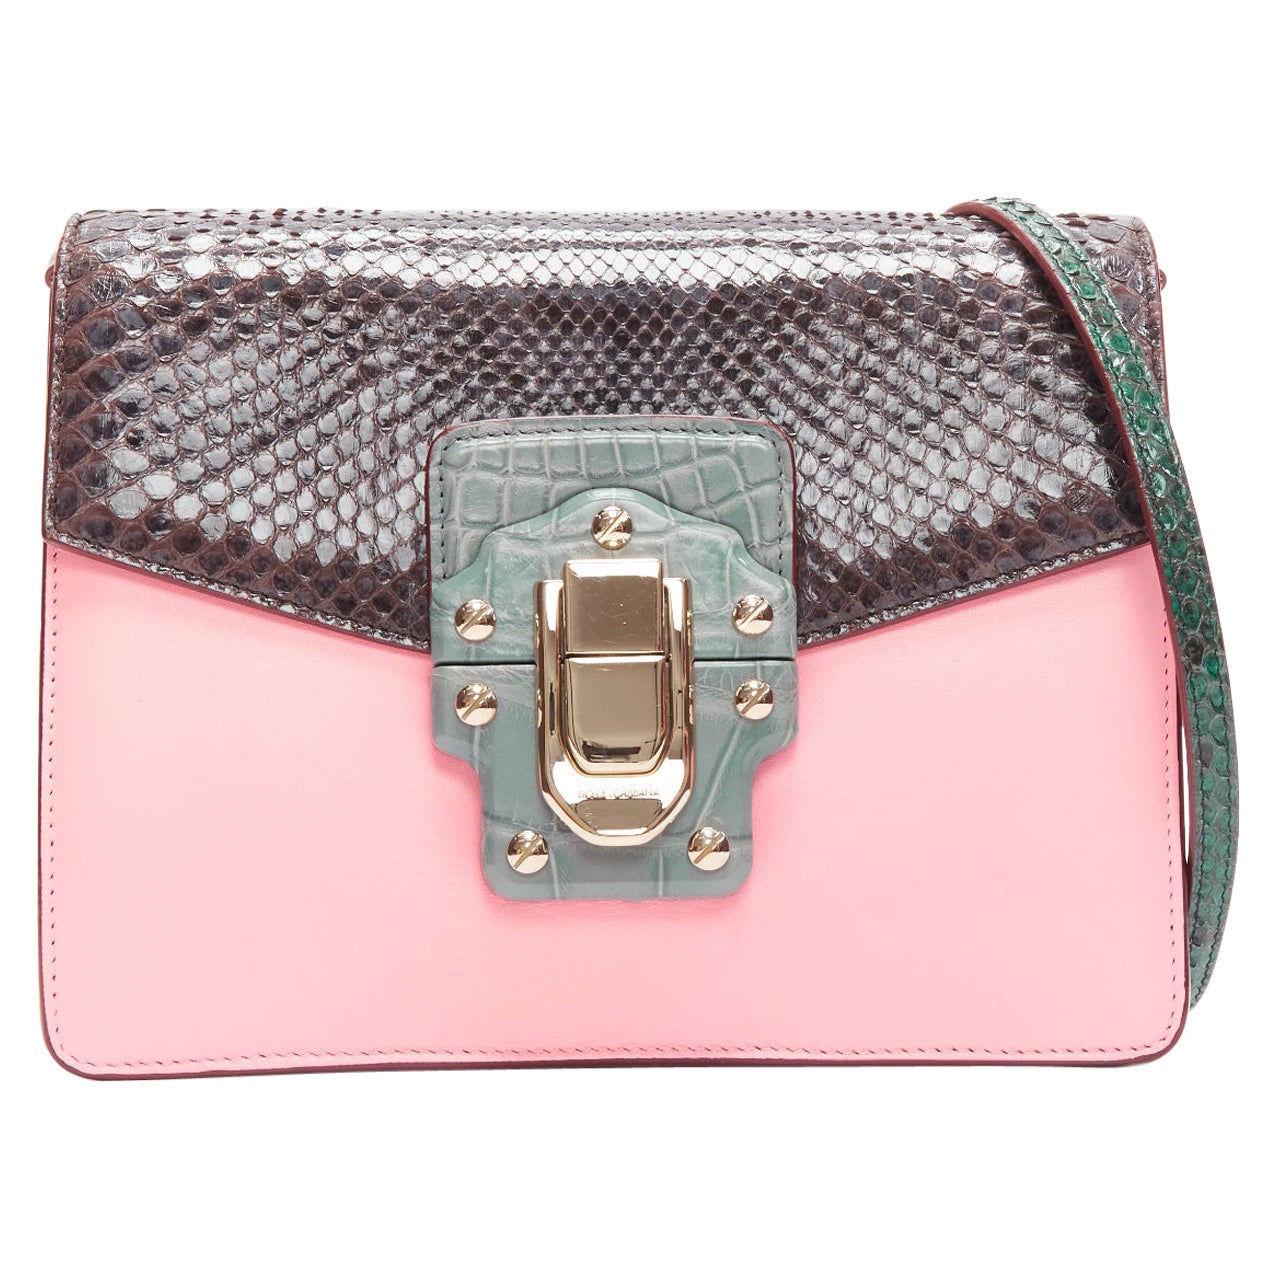 DOLCE GABBANA Lucia pink grey scaled leather flap clasp crossbody bag For Sale